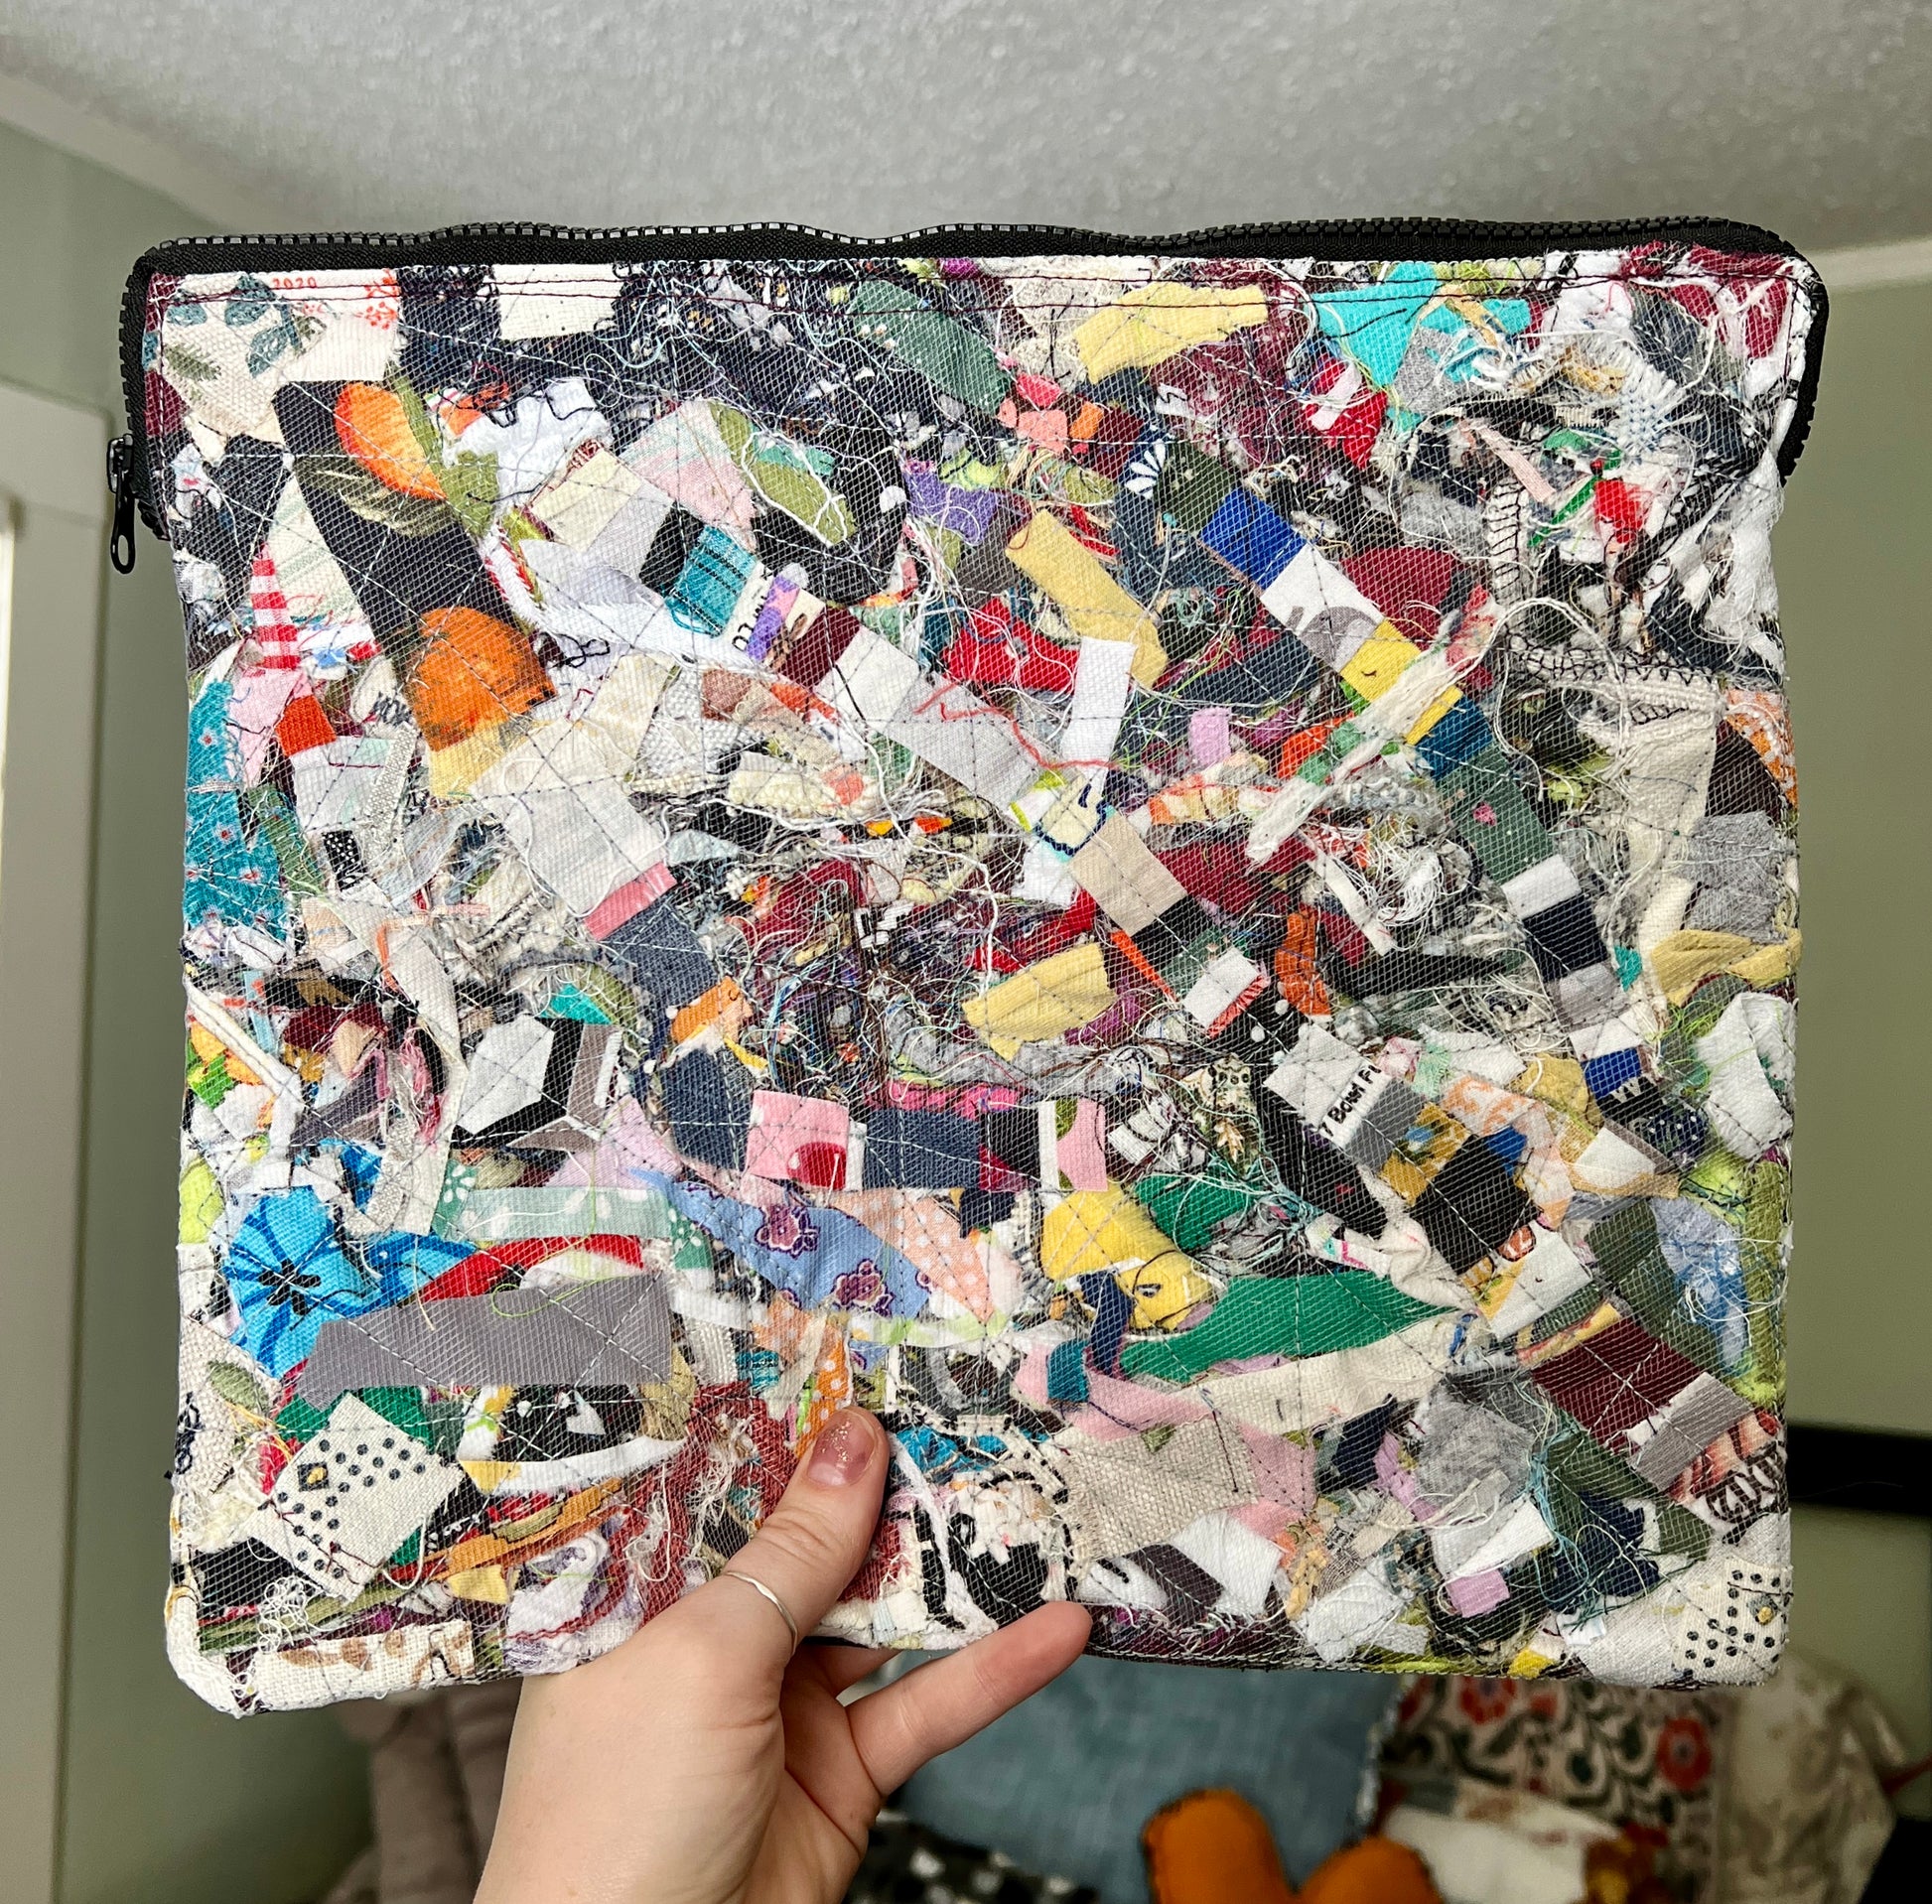 ipad case, held up for scale, created from fabric scraps under a tulle layer, zipper closure, padded, with inside pocket